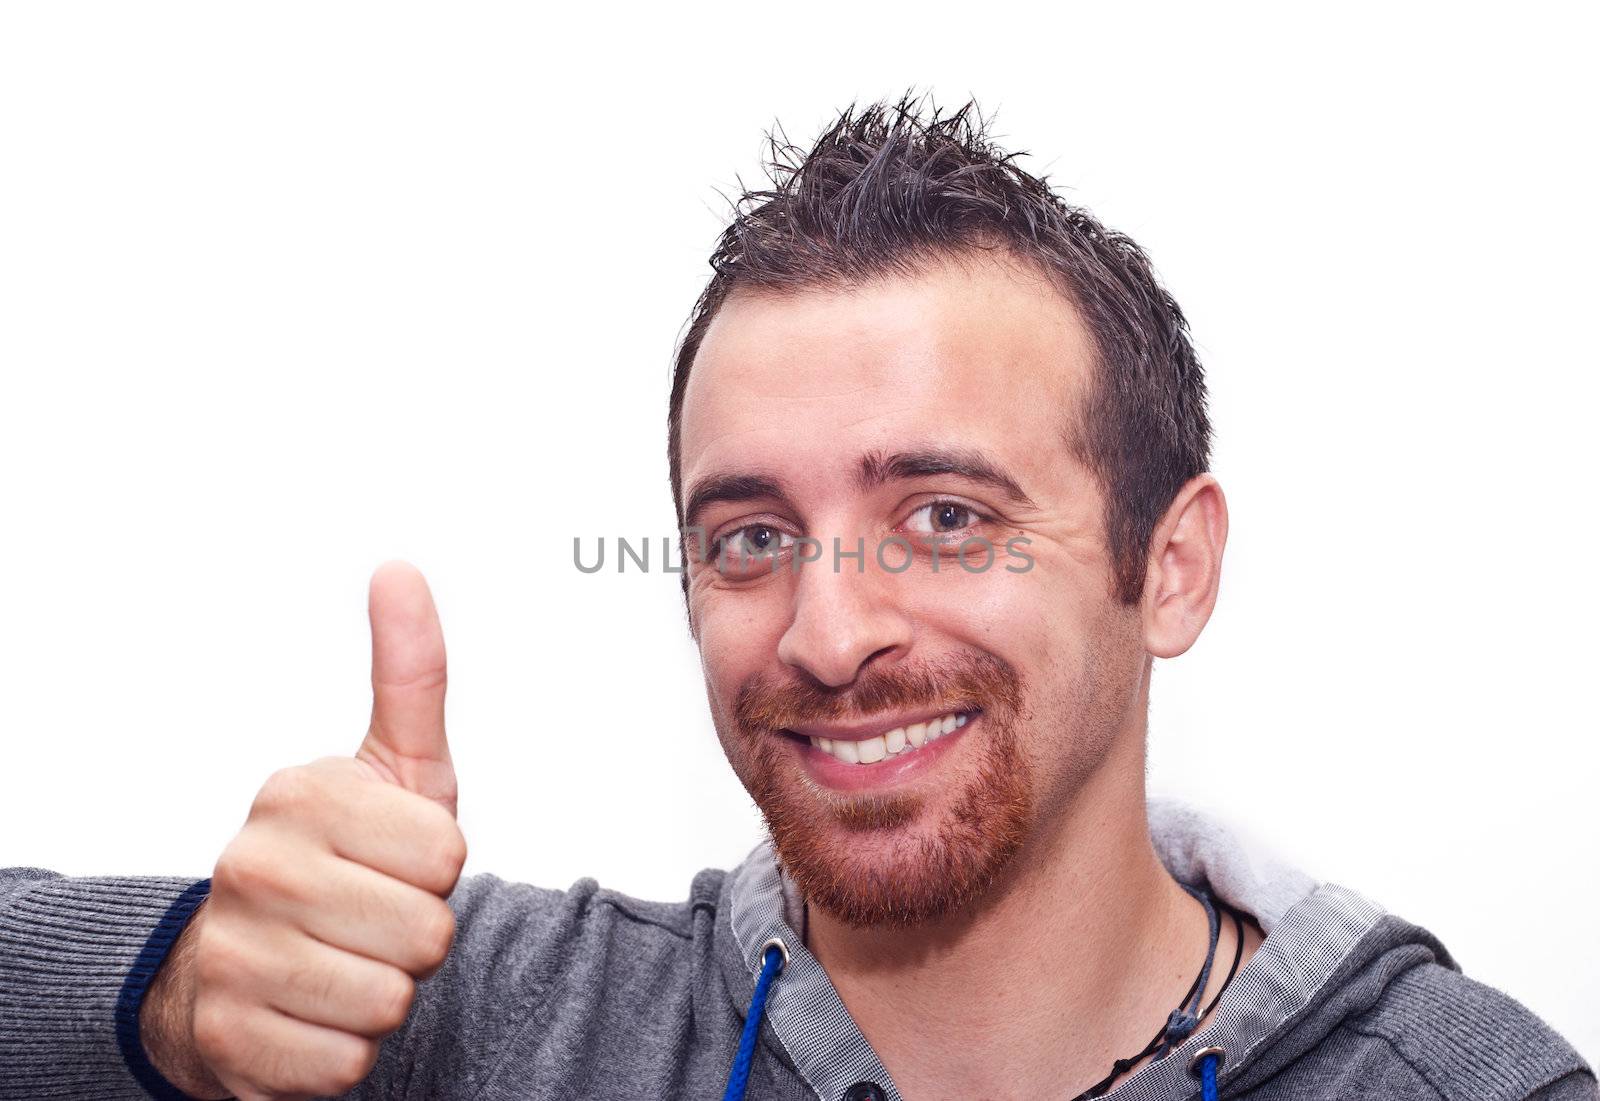 Portrait Of A Happy Young Man Showing Thumb Up Sign Isolated On White Background